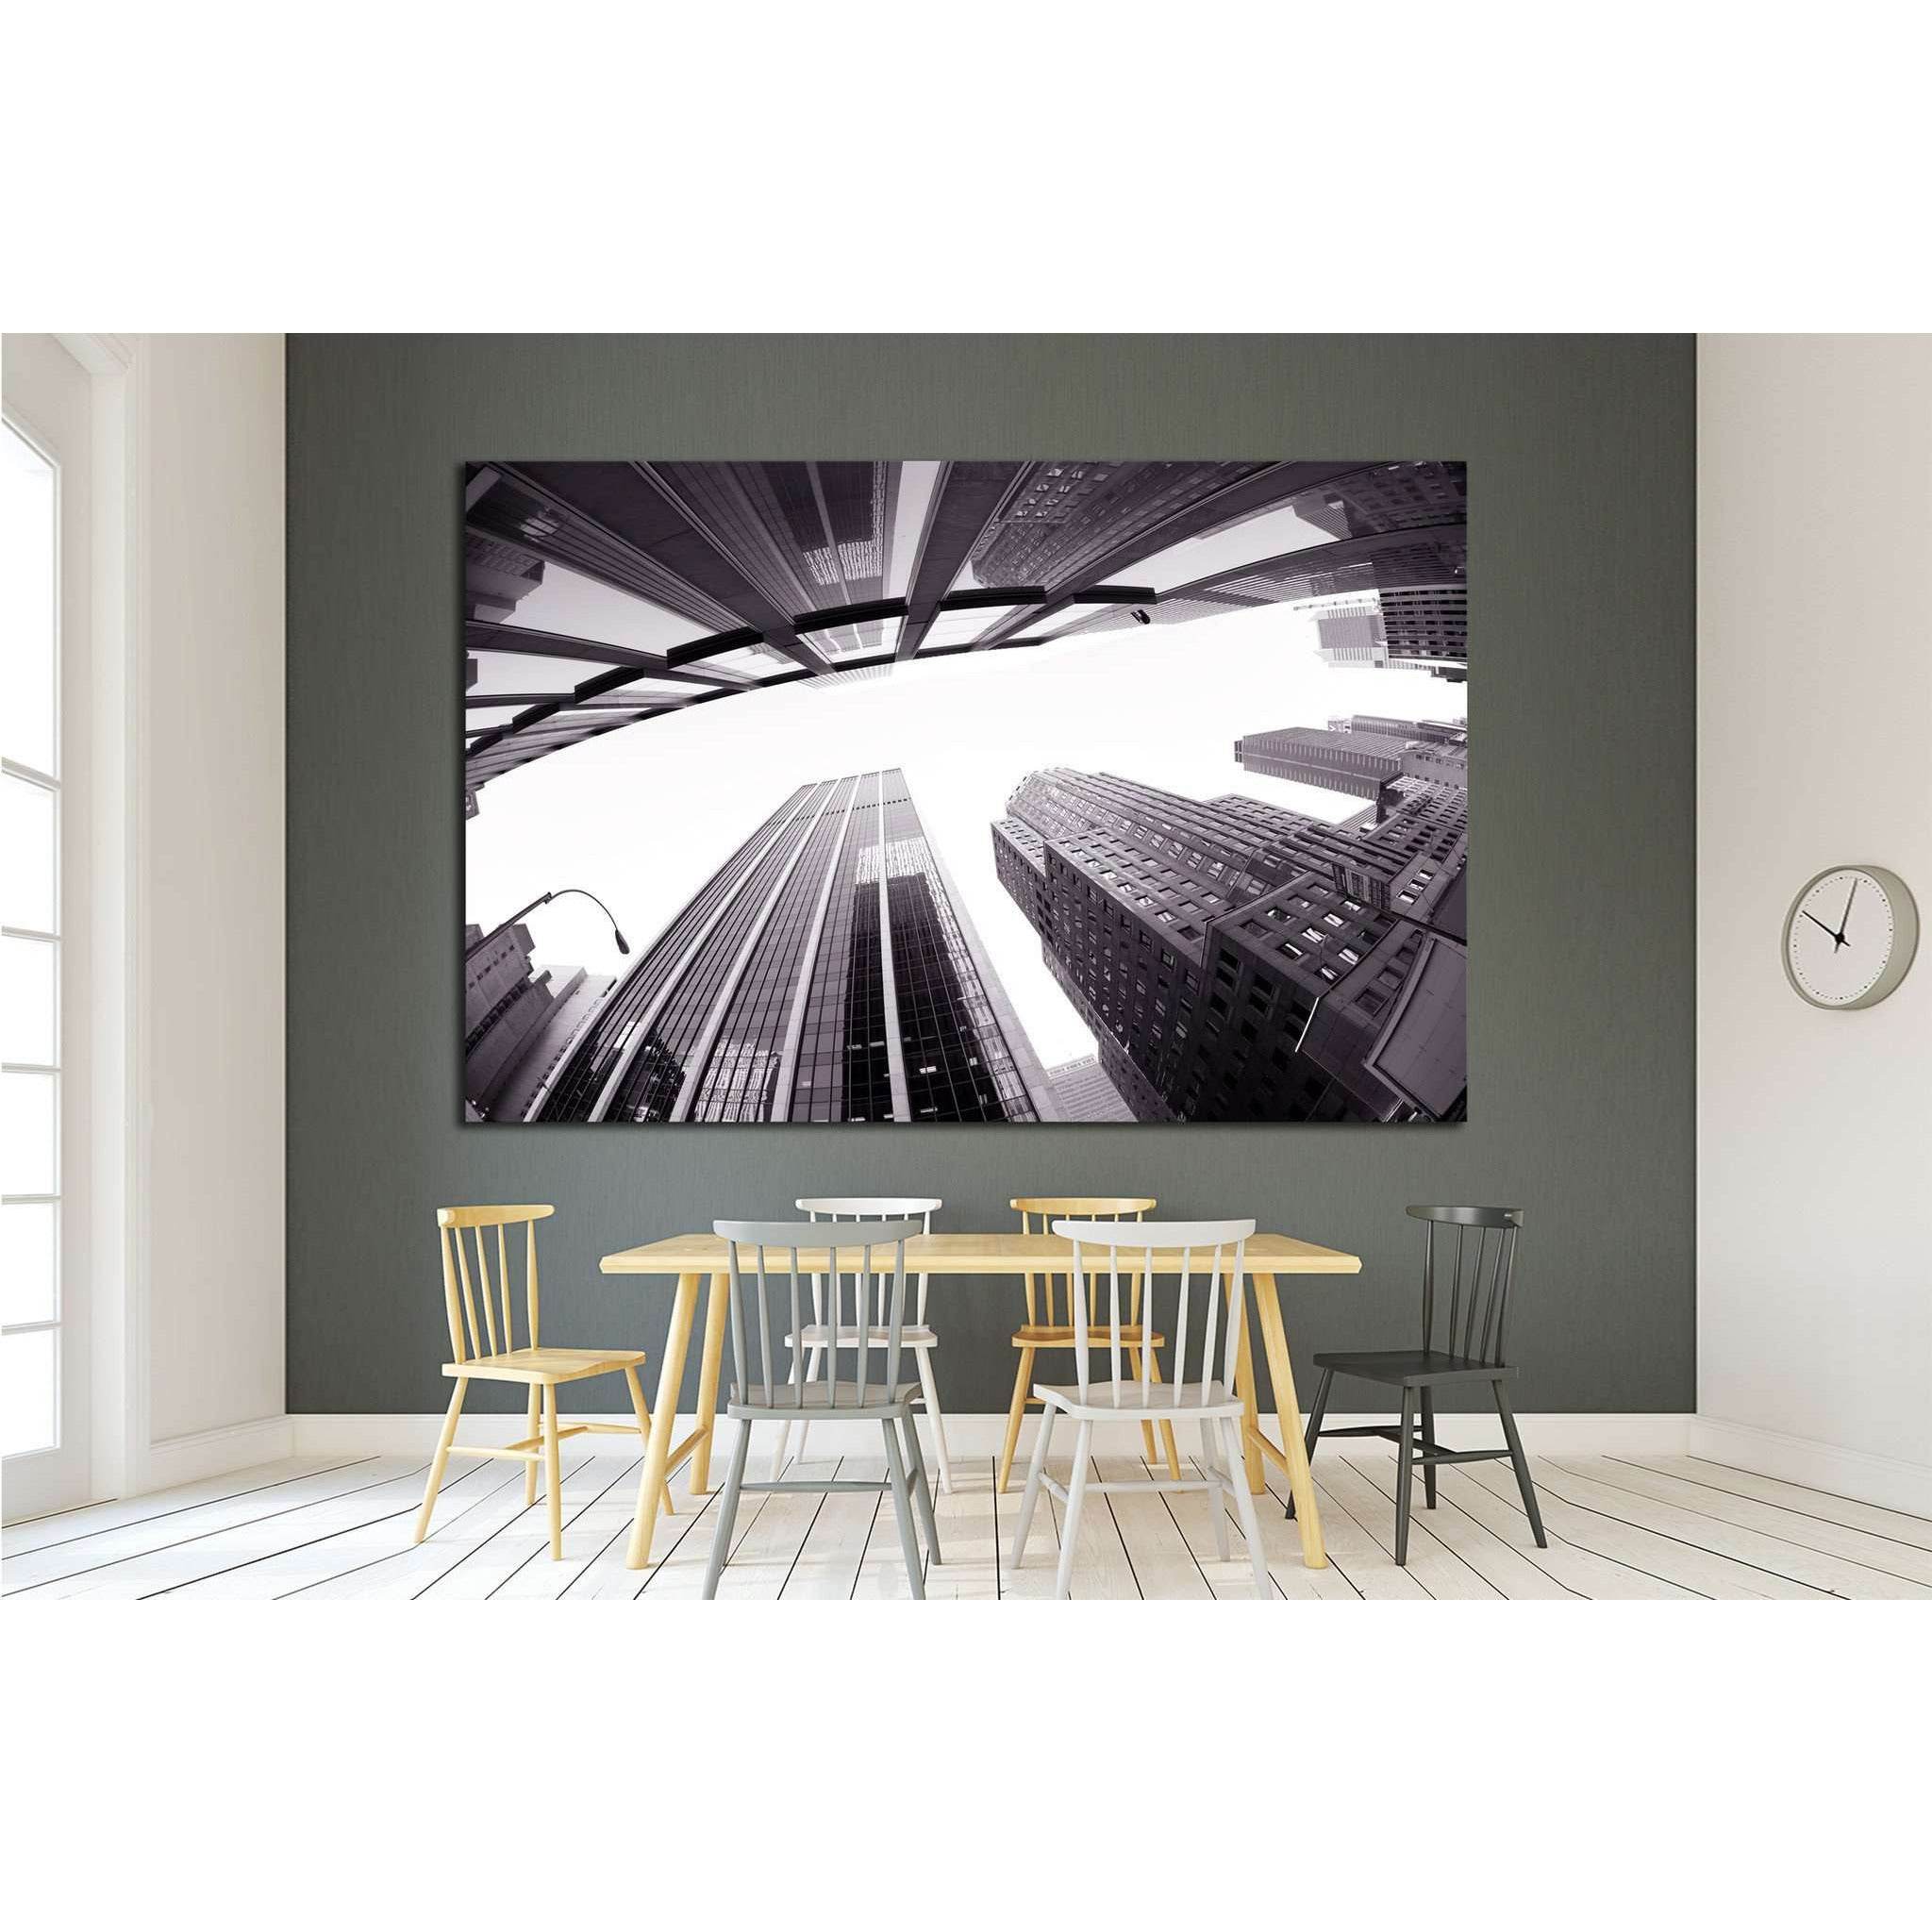 new york №1507 Ready to Hang Canvas Print